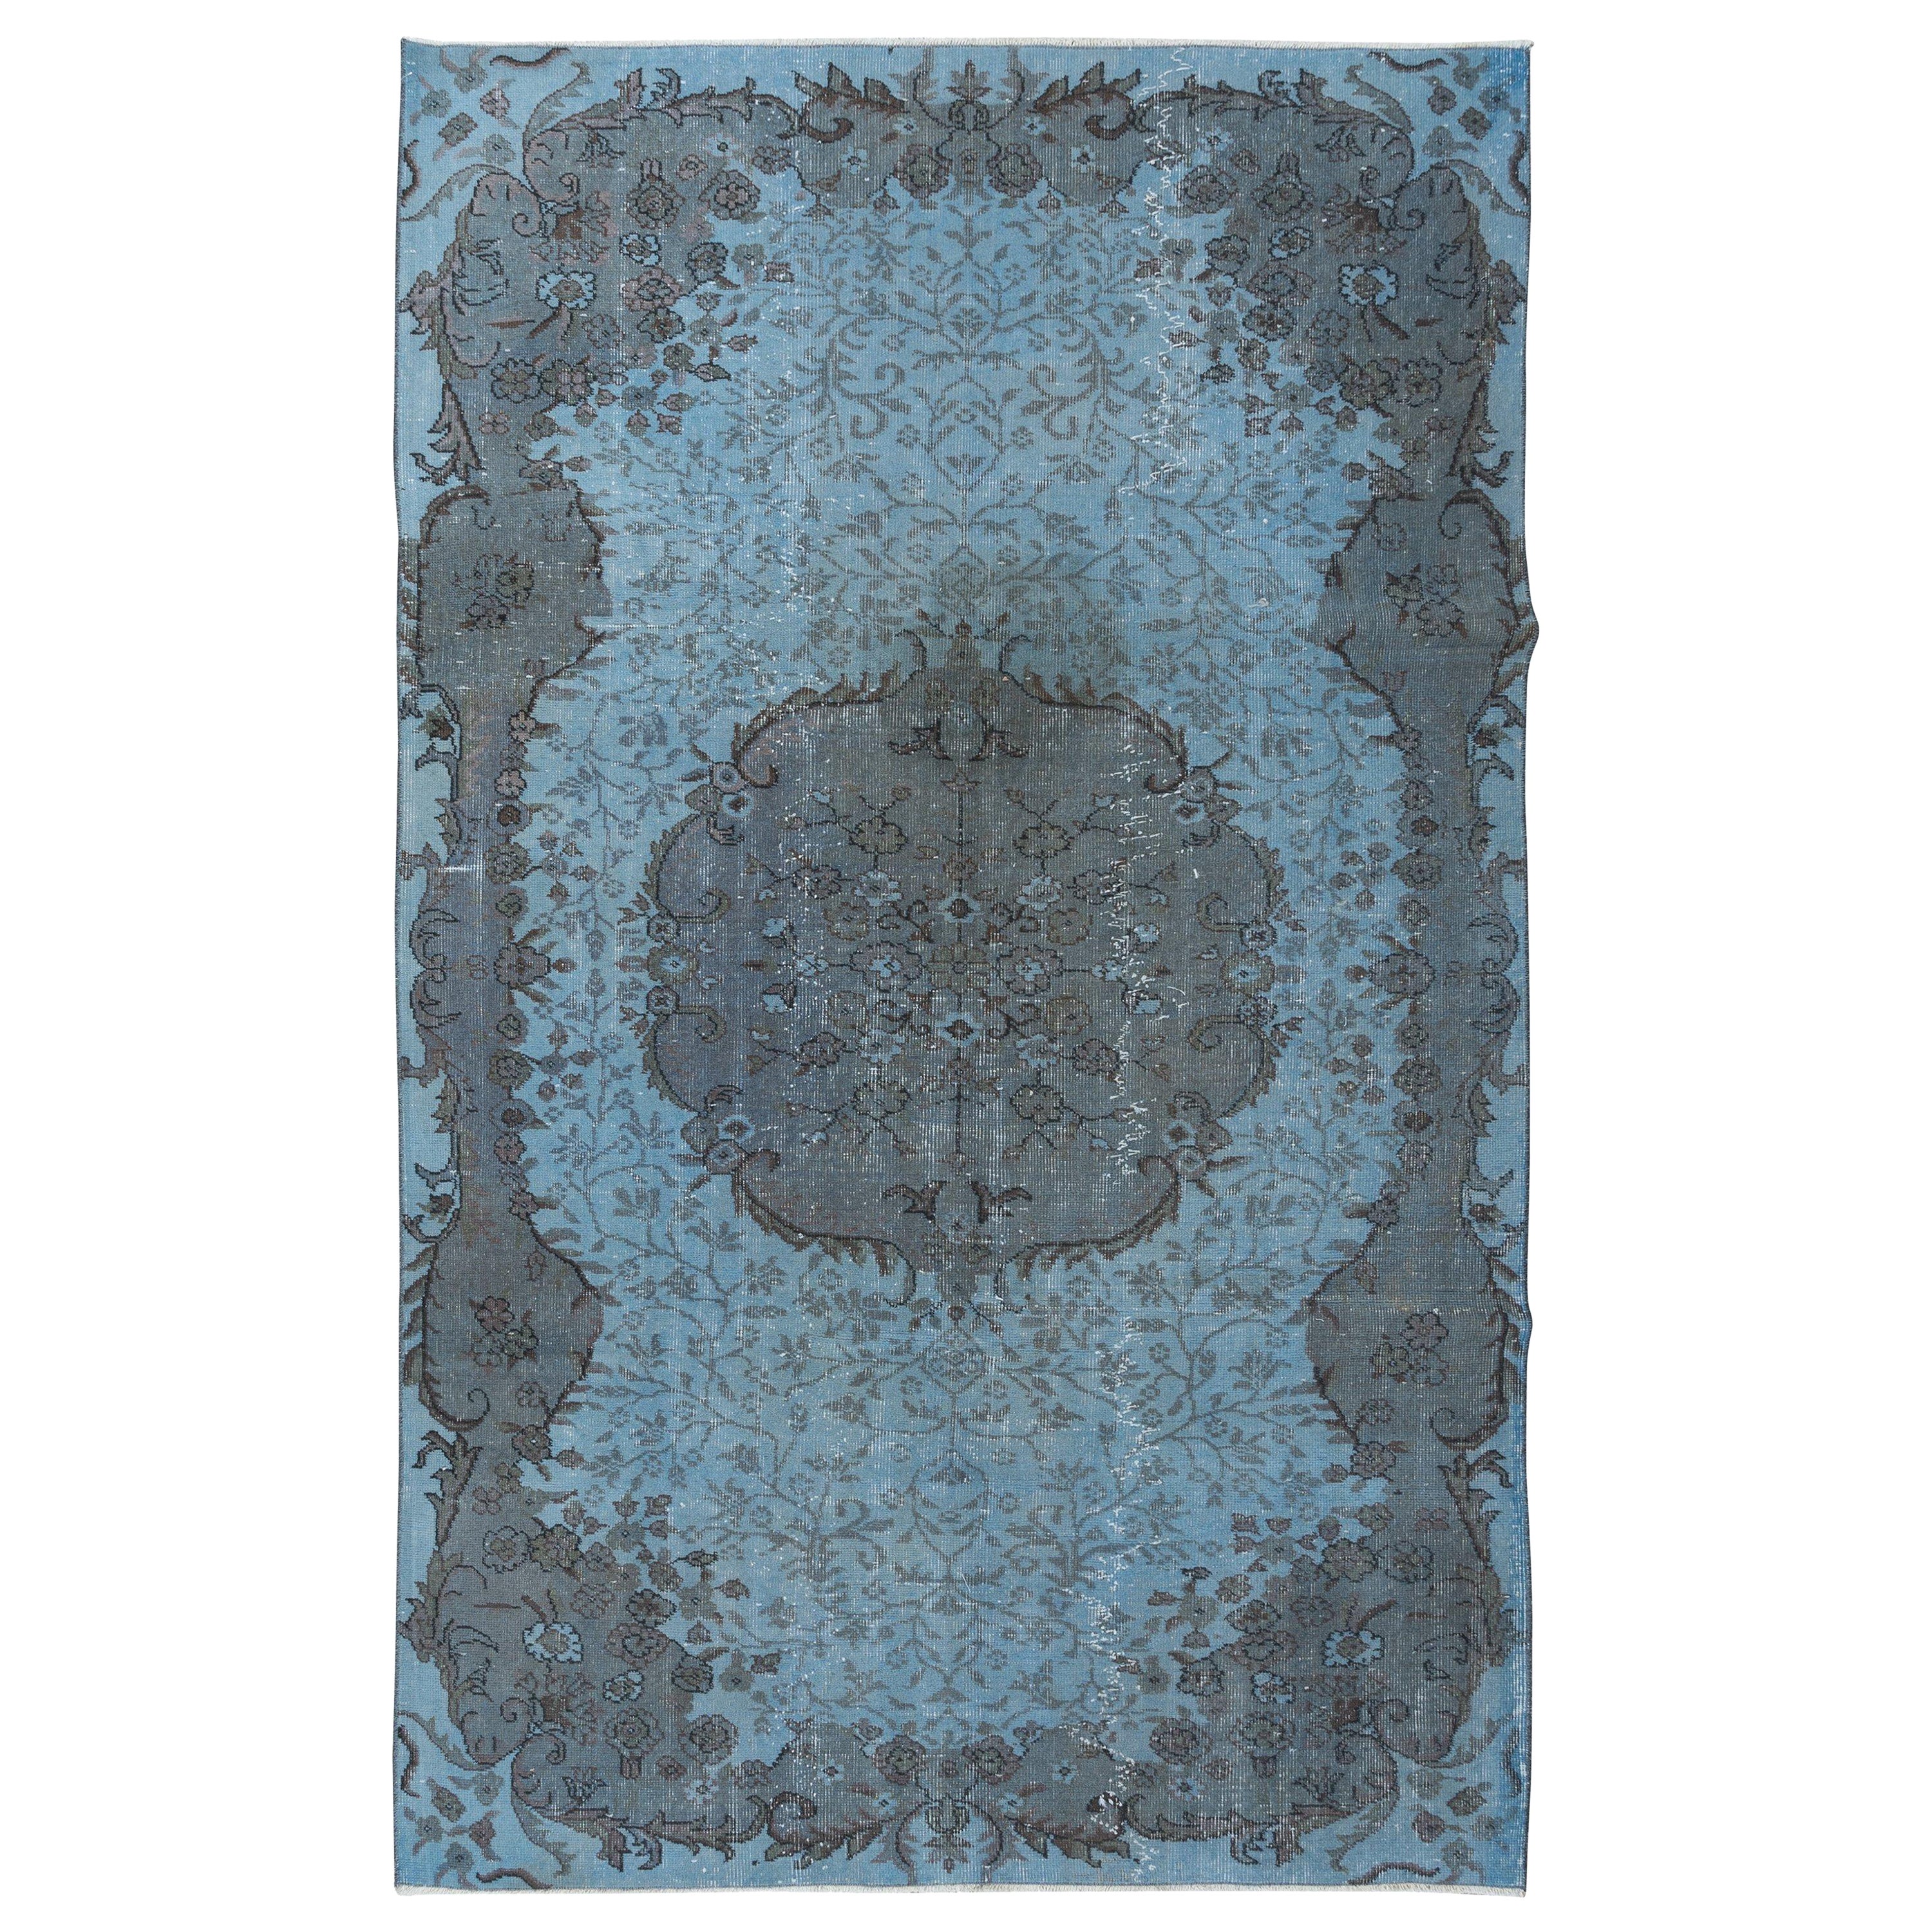 5.5x8.5 Ft Sky Blue Modern Area Rug, Handwoven & Handknotted in Isparta, Turkey For Sale